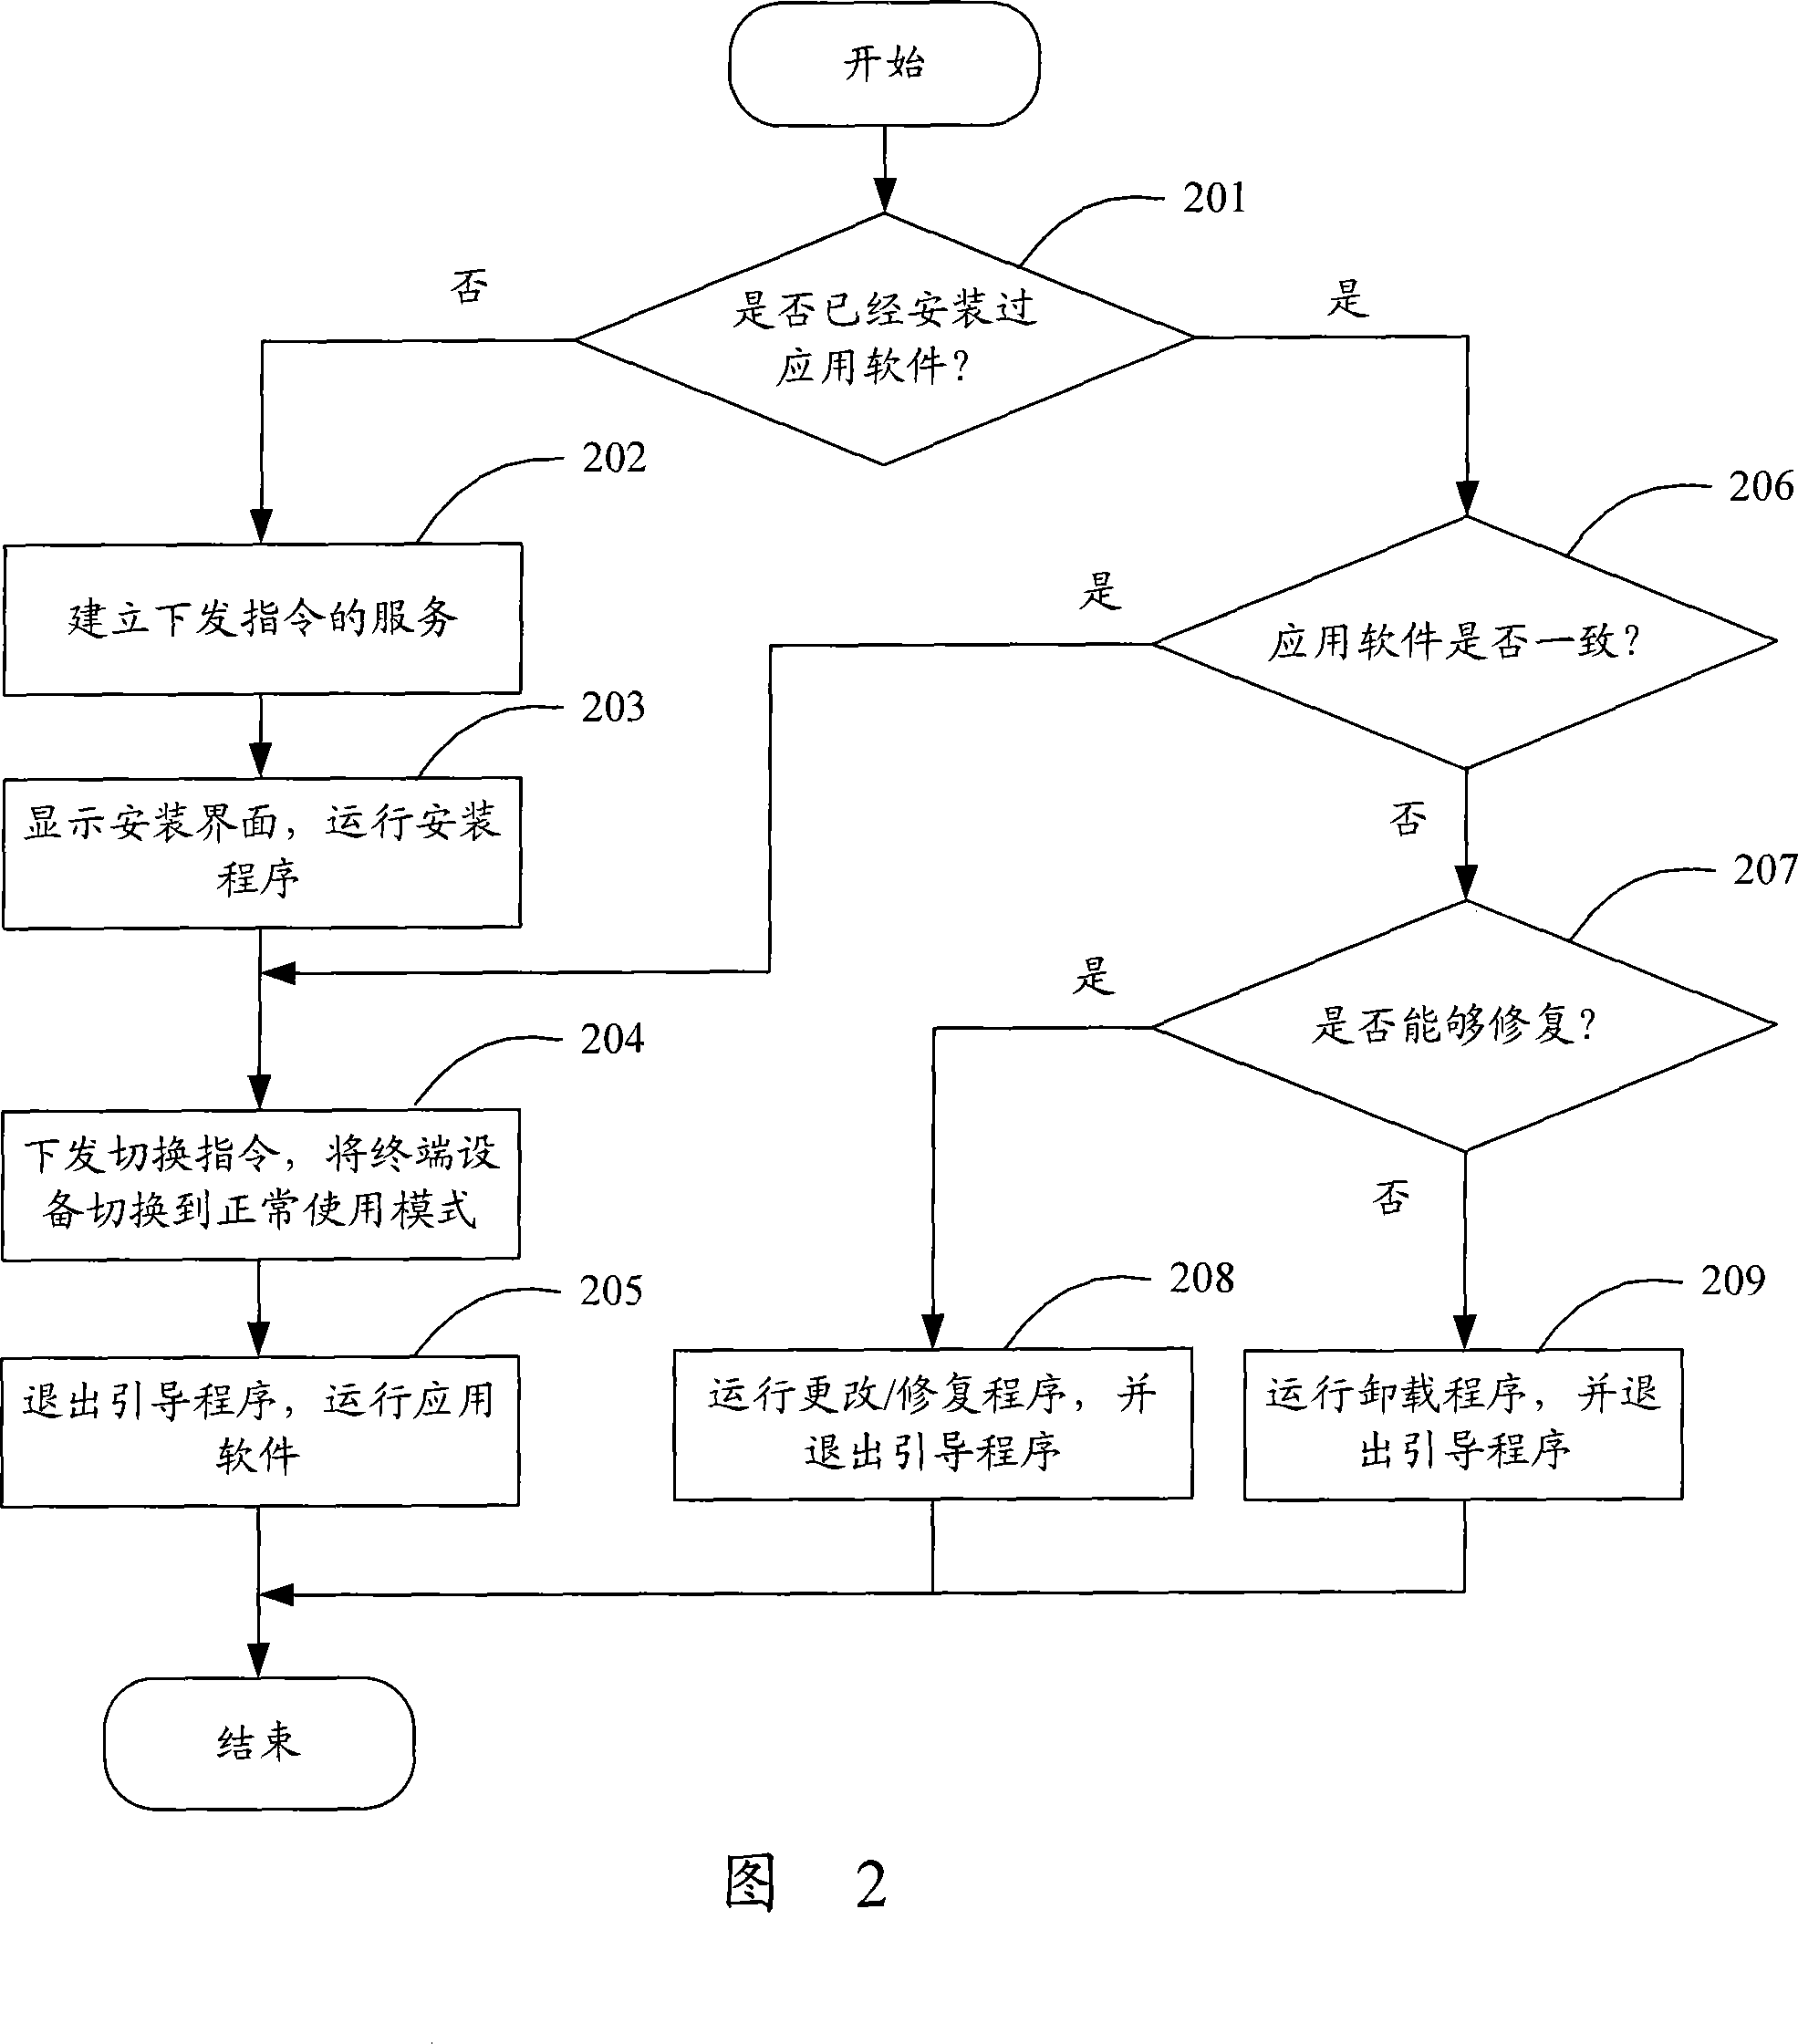 Automatic installation and upgrading method of terminal unit application software